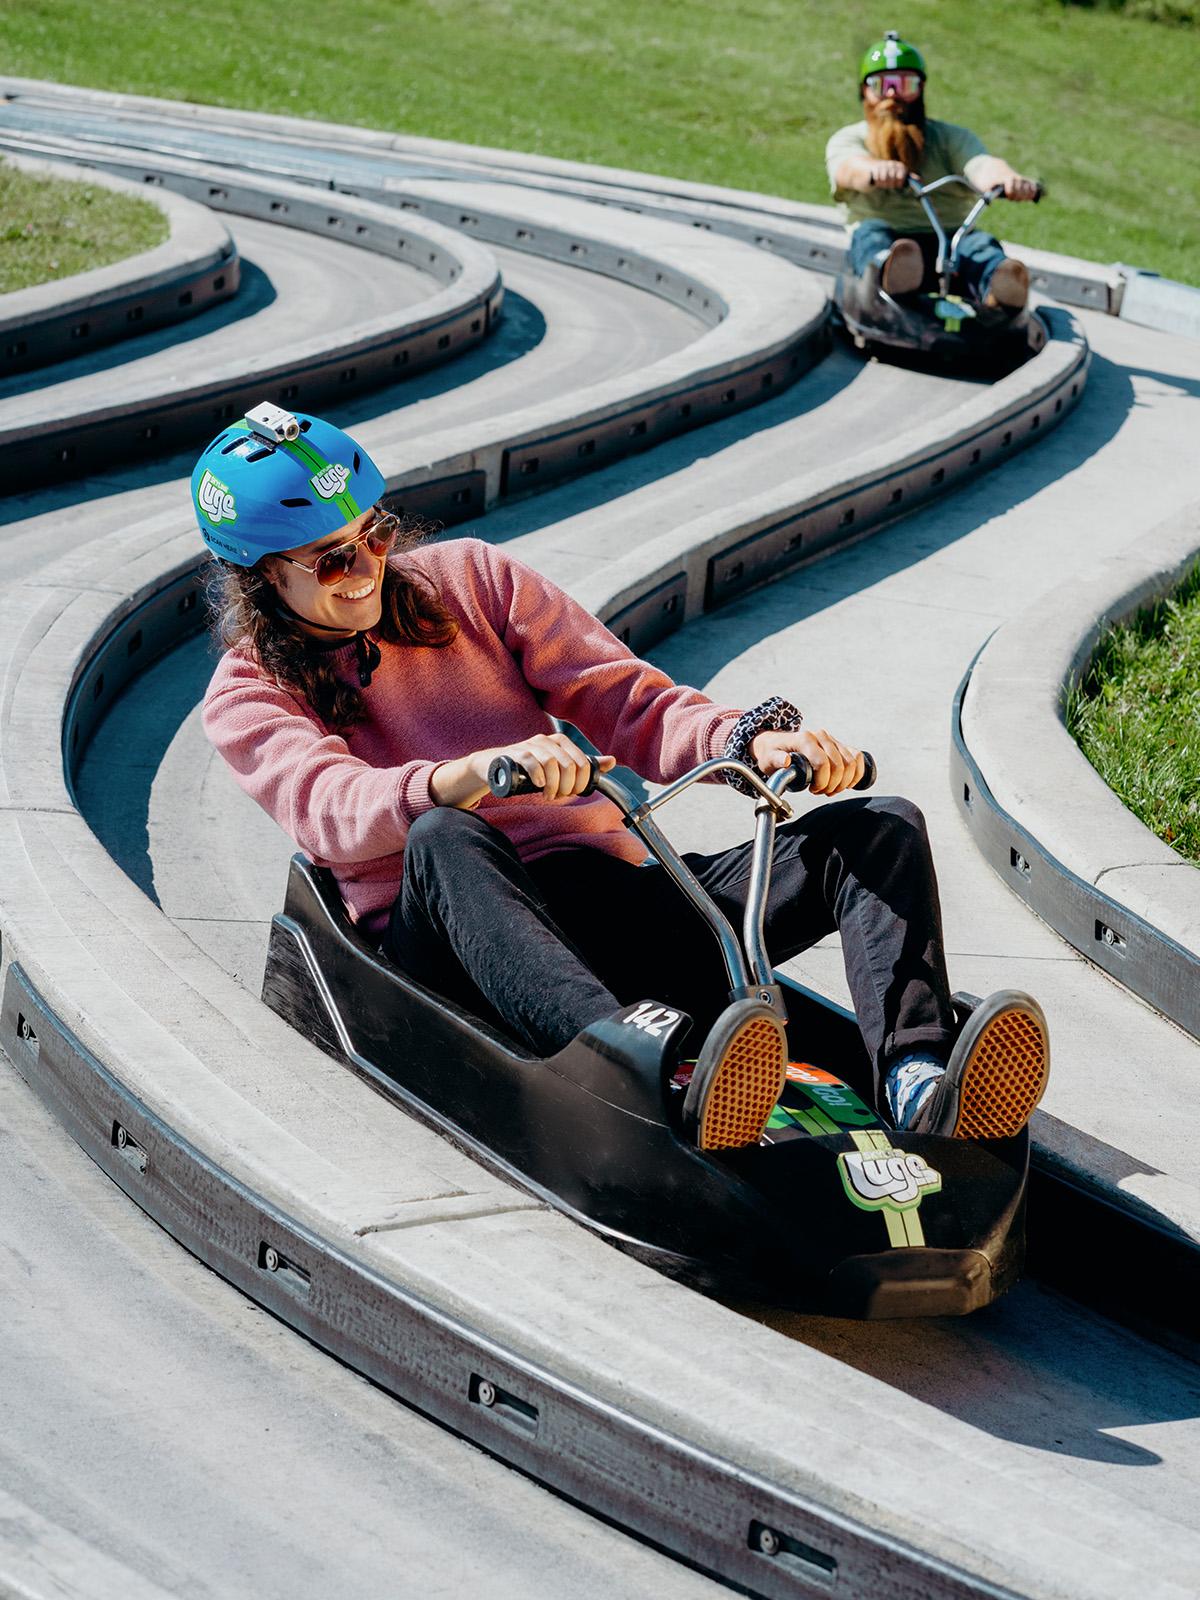 A lady finishes her ride down the Downhill Karting Calgary tracks.